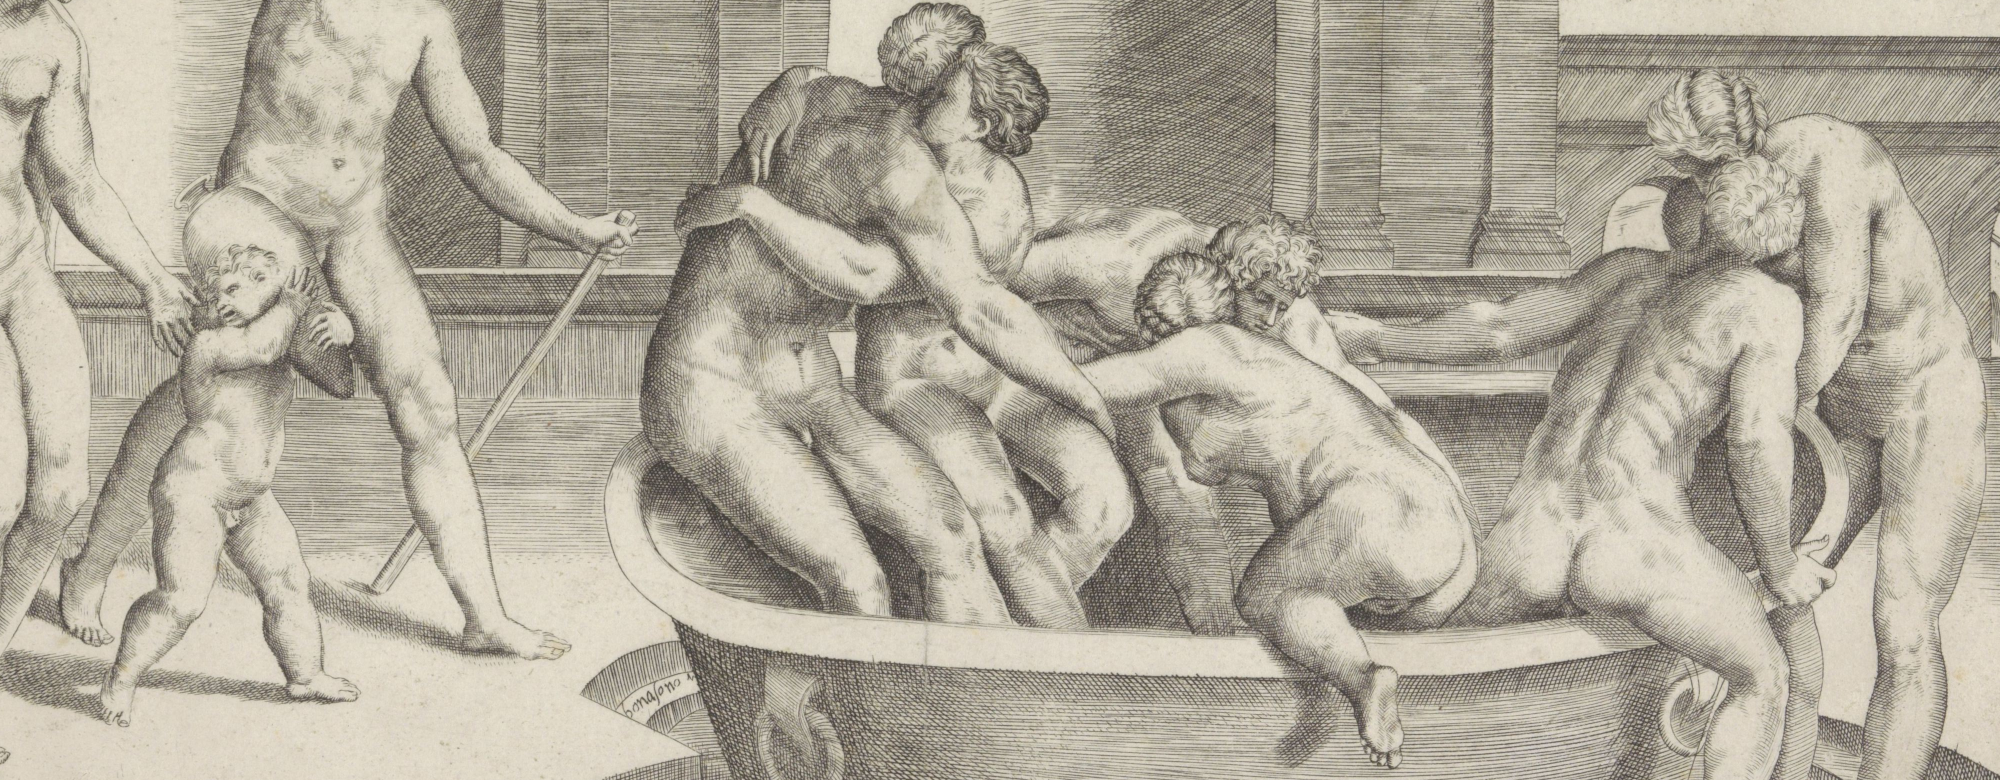 A group of naked men and women in a large bathtub in a bathhouse.